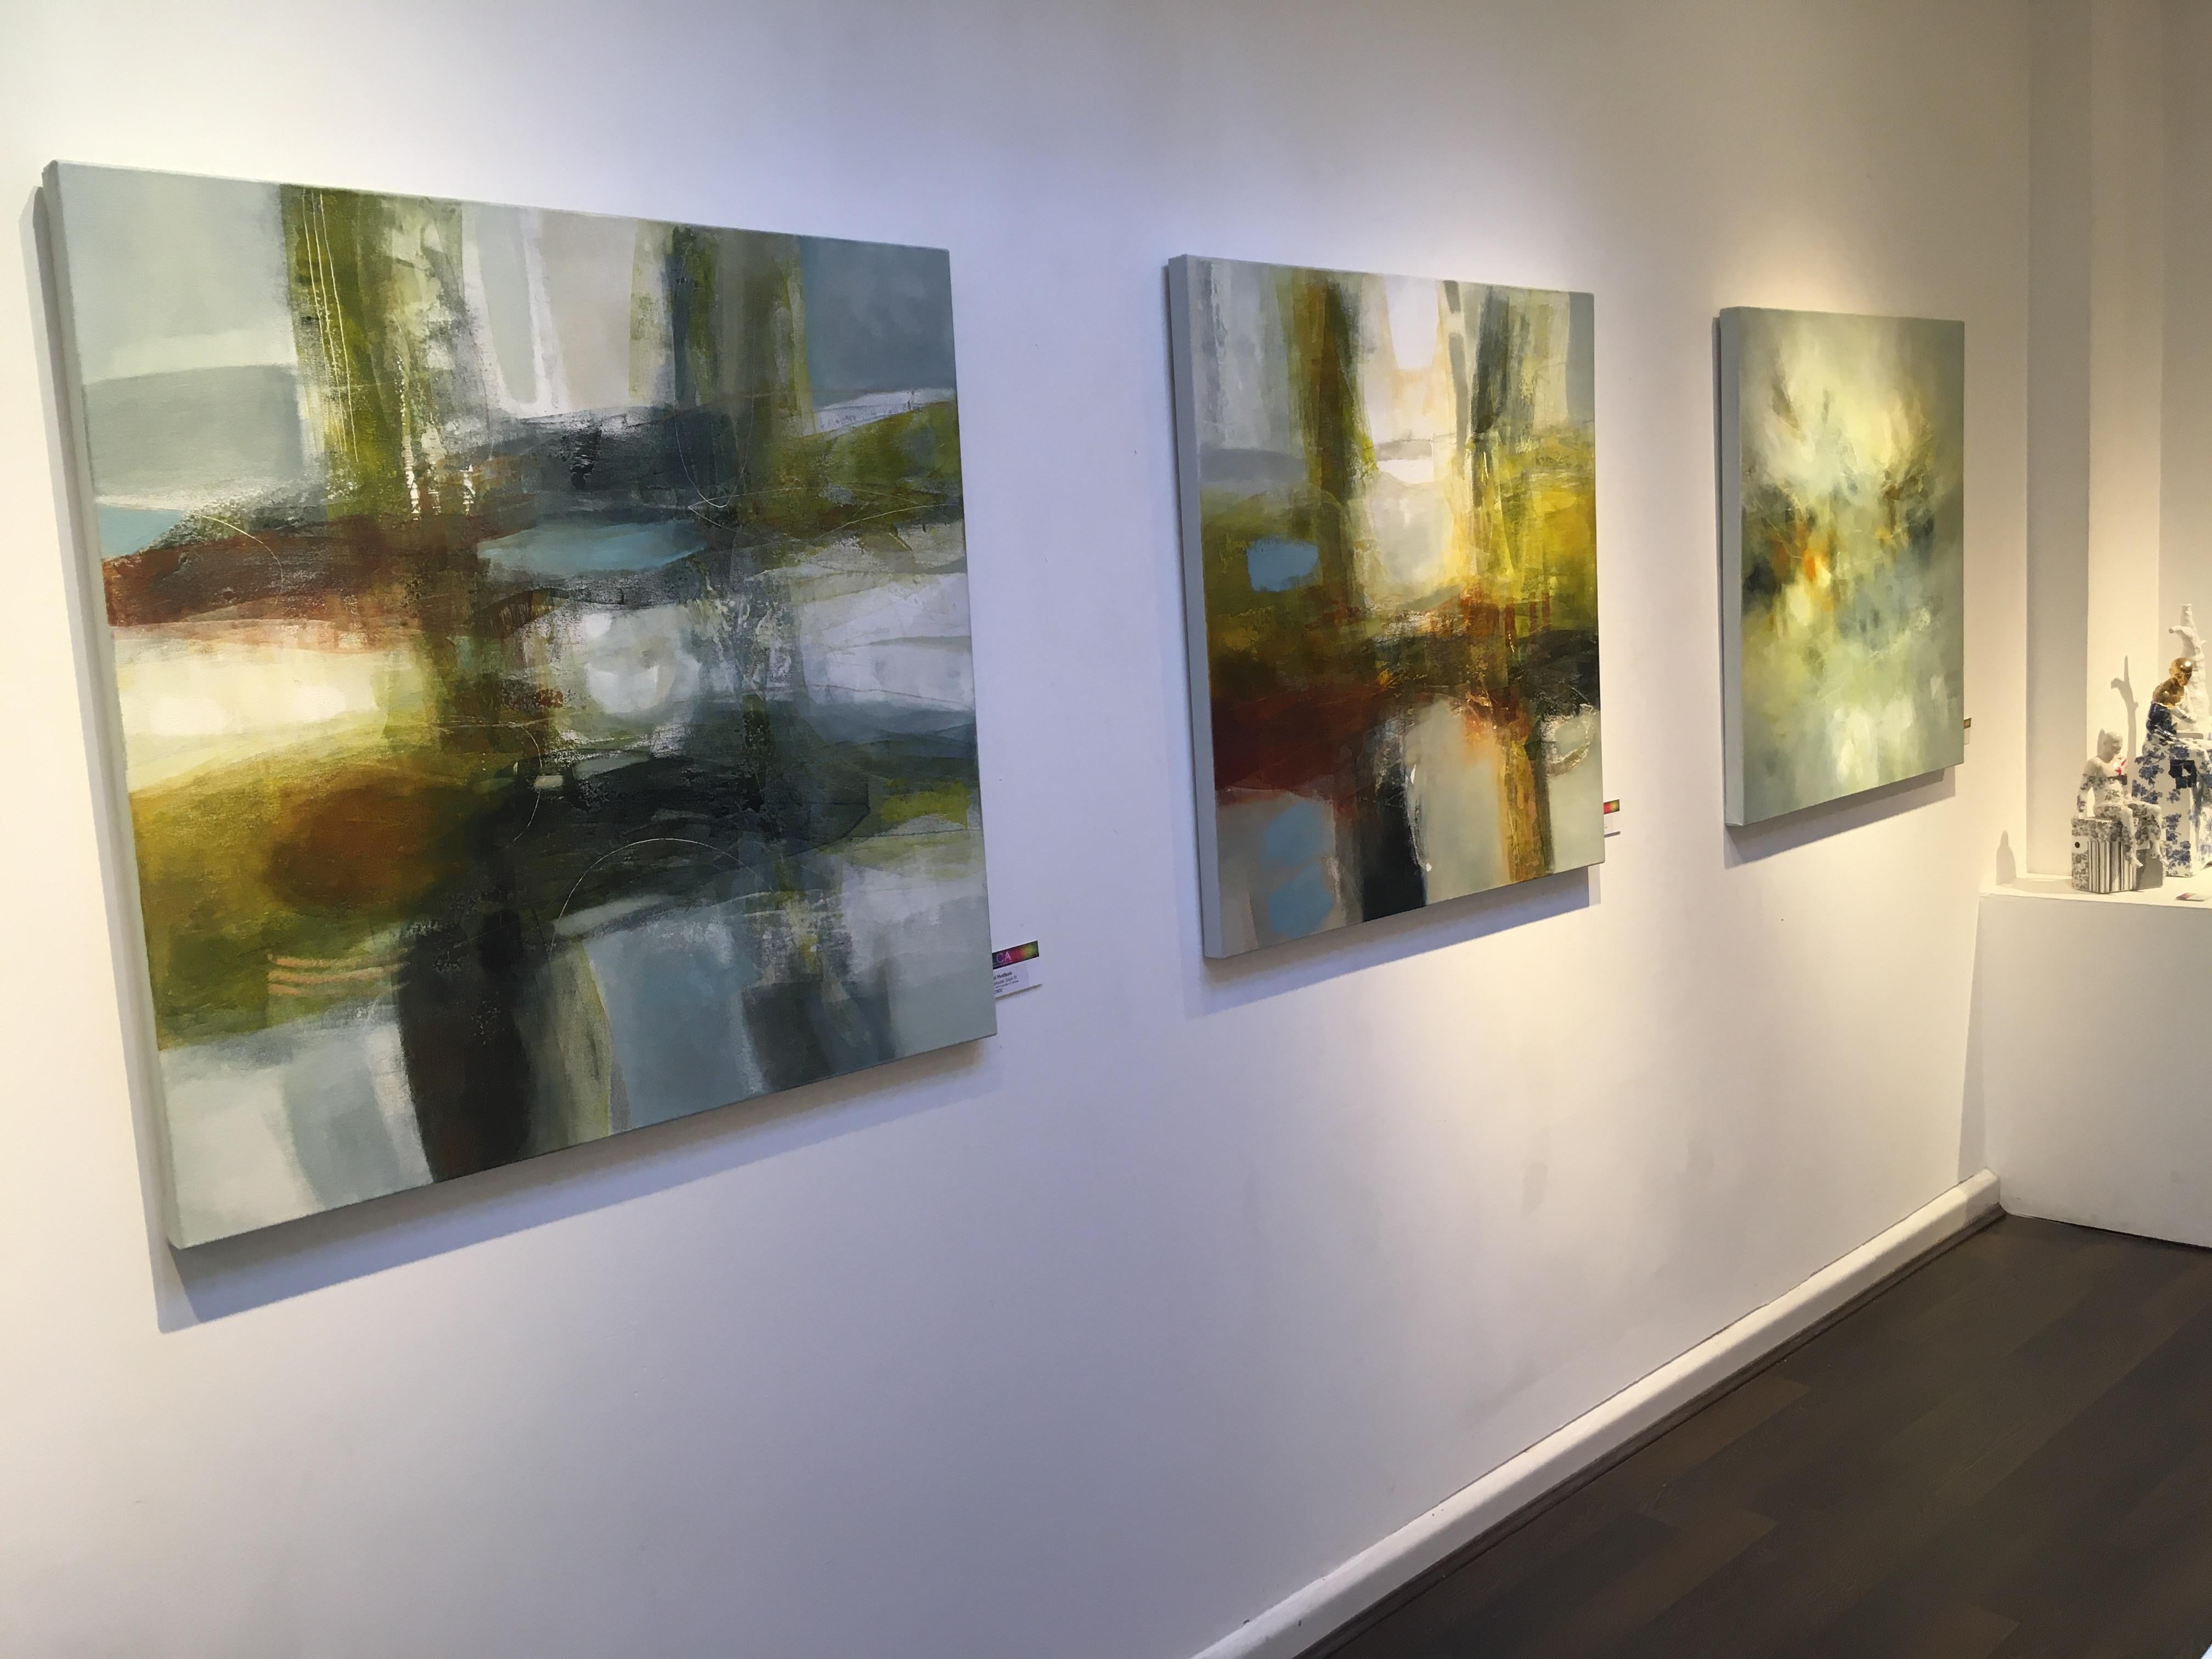 Val Hudson is a painter drawing on a wide spectrum of ideas and influences. Her paintings present a dreamlike quality of ephemeral spaces punctuated with half seen evocations of memory, experience and sensory imaginings. The paintings are also